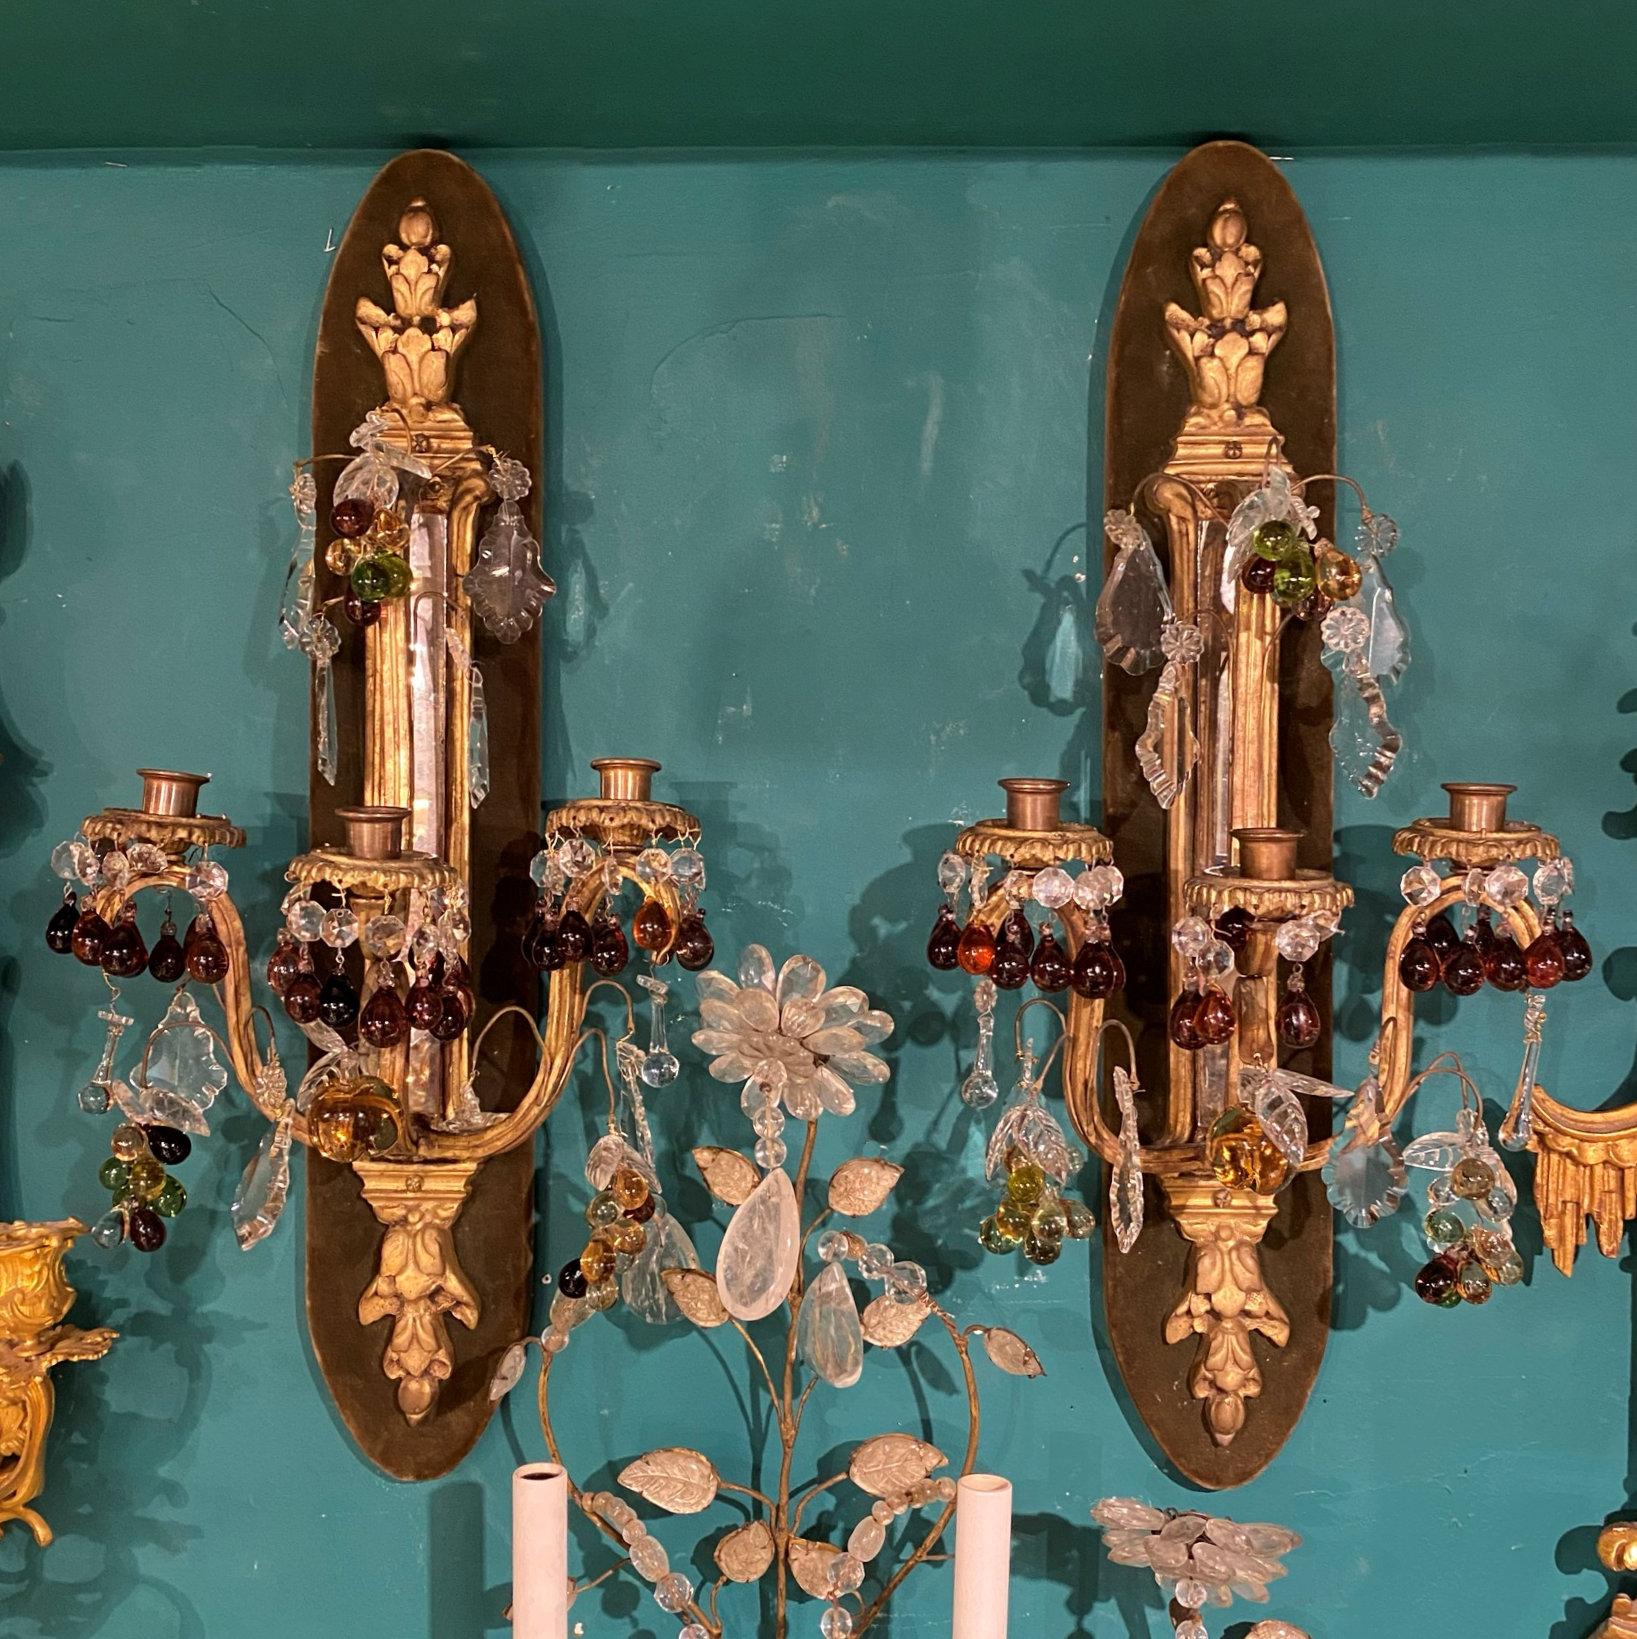 pr of French 19 century Bronze and crystal Sconces with Fruit Shaped Crystal Pendants.
Backed by wooden backplate covered in textile.
Not Wired for electricitity yet.